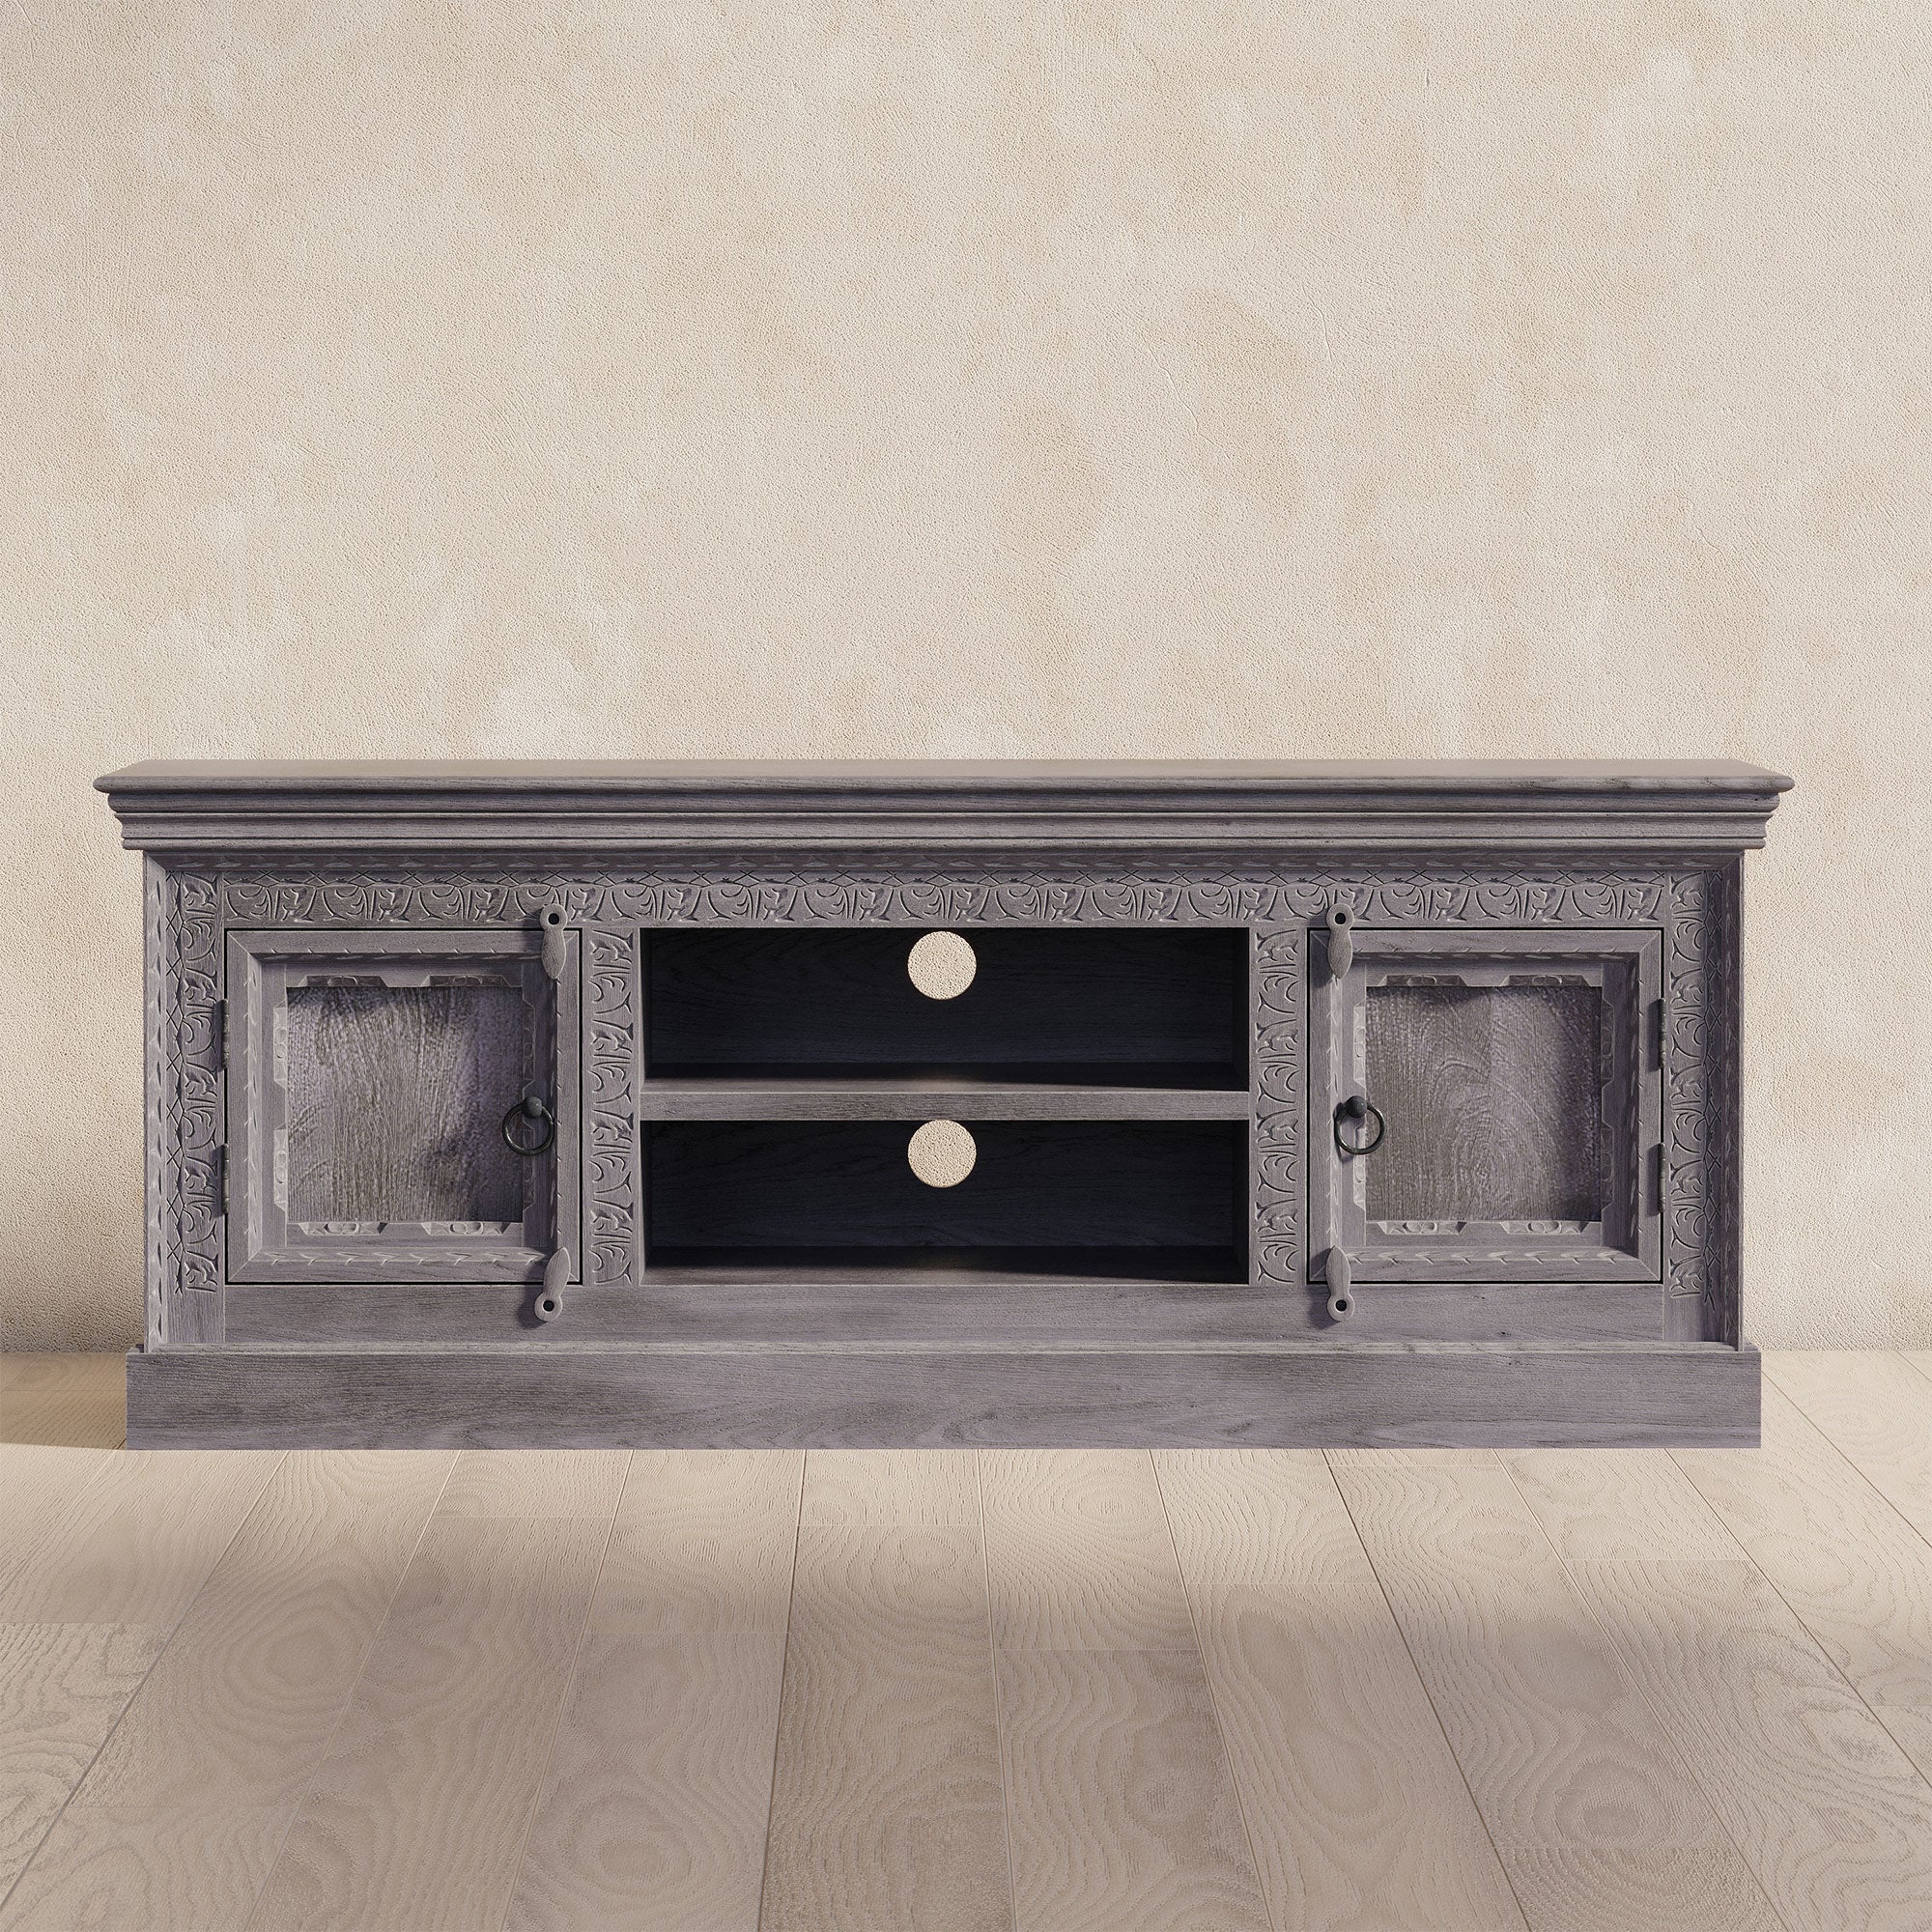 Mahala Nomad Wooden Media Unit in Distressed Grey Finish in Media Units by VMInnovations